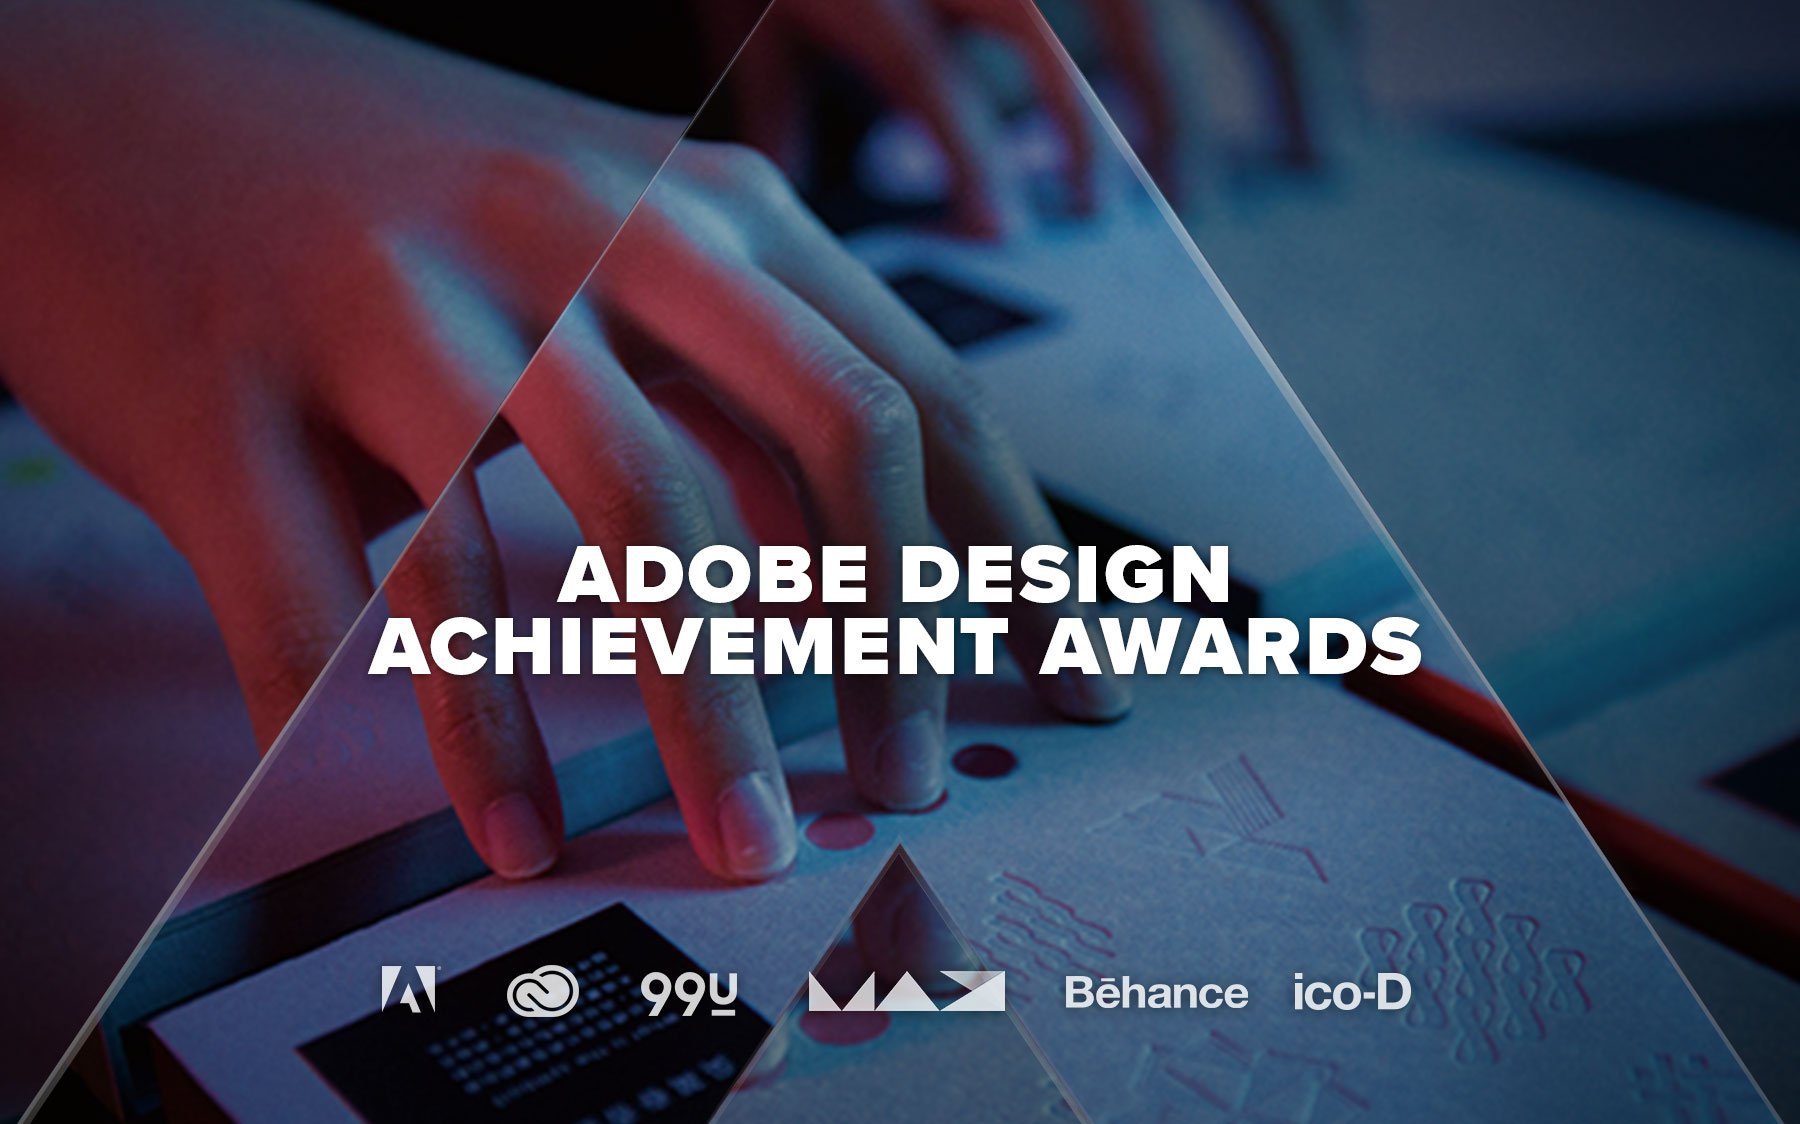 Adobe Style Accomplishment Award 2019 for Trainees and Emerging Developers